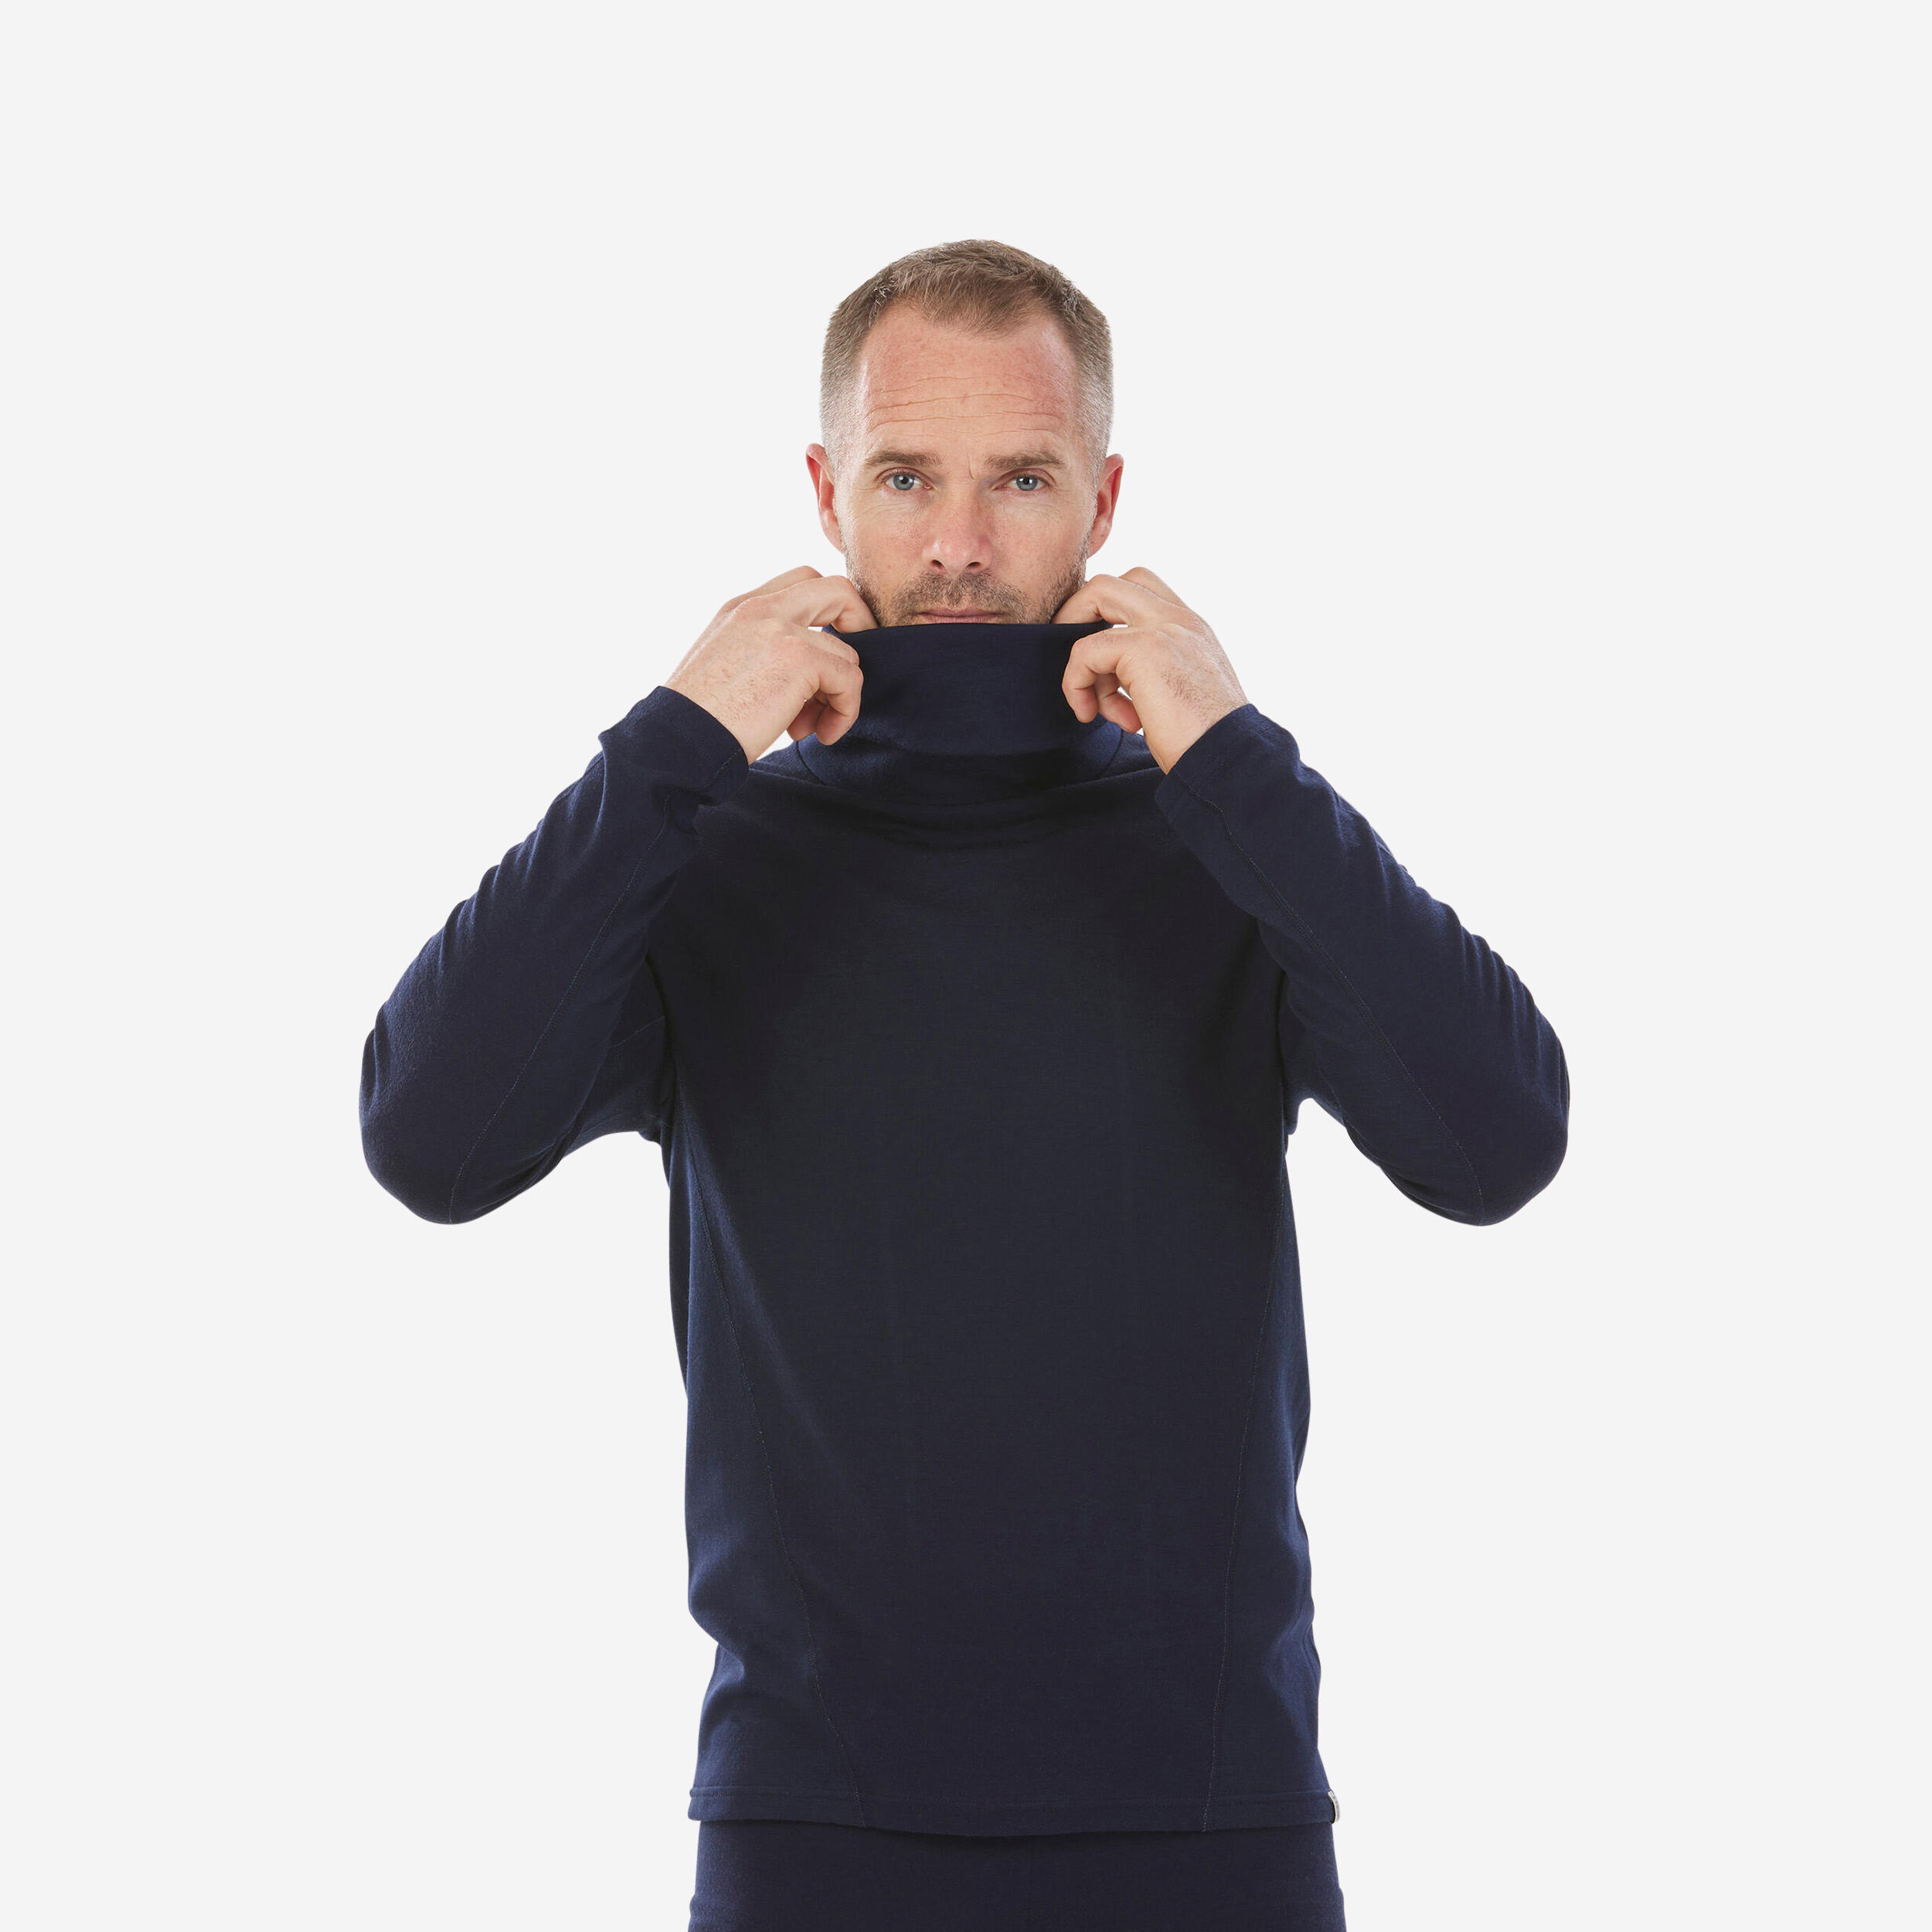 Buy Decathlon Base Layer Black Top from the Next UK online shop